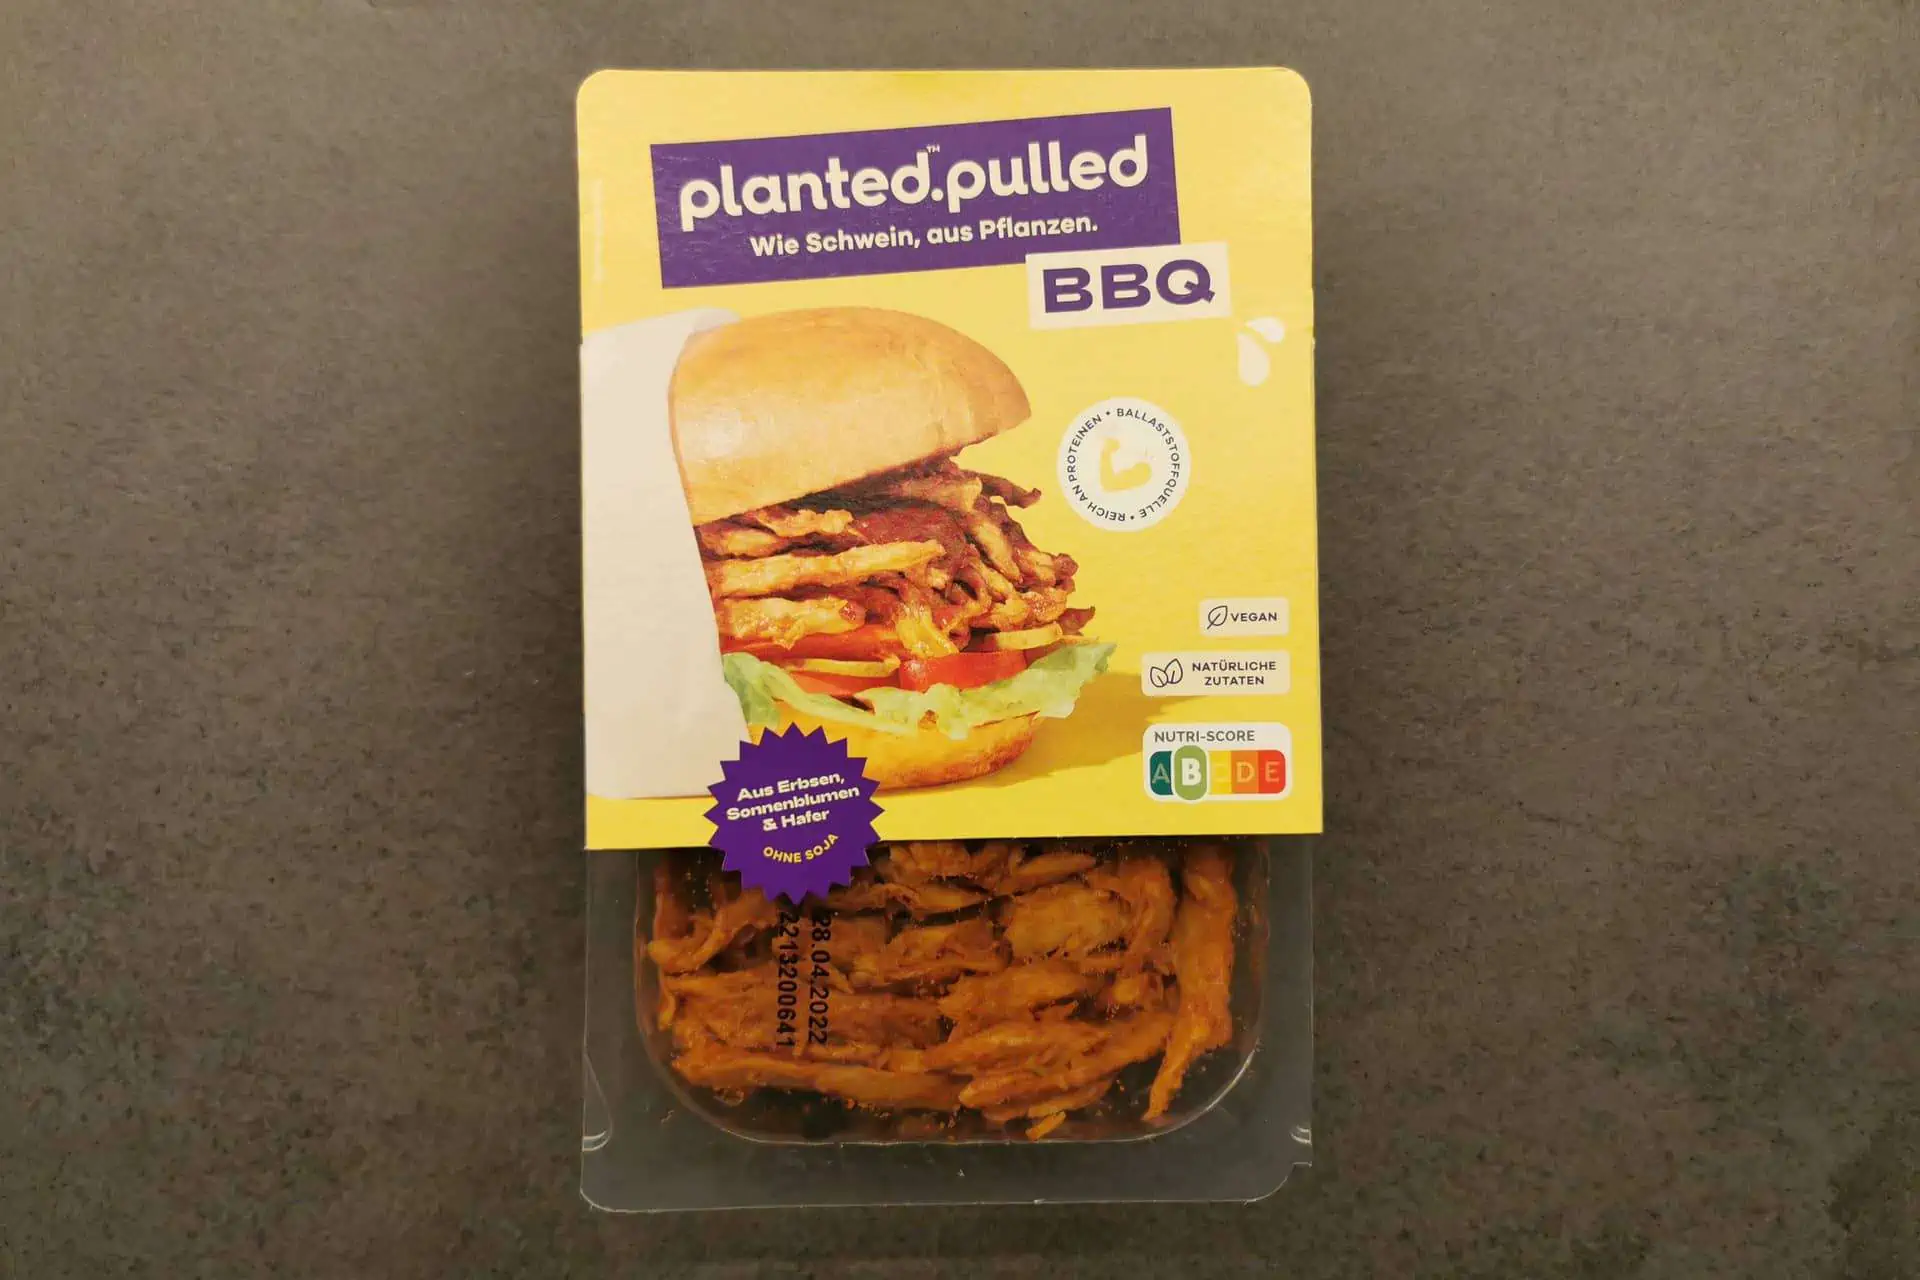 Planted: Pulled BBQ Produktbild